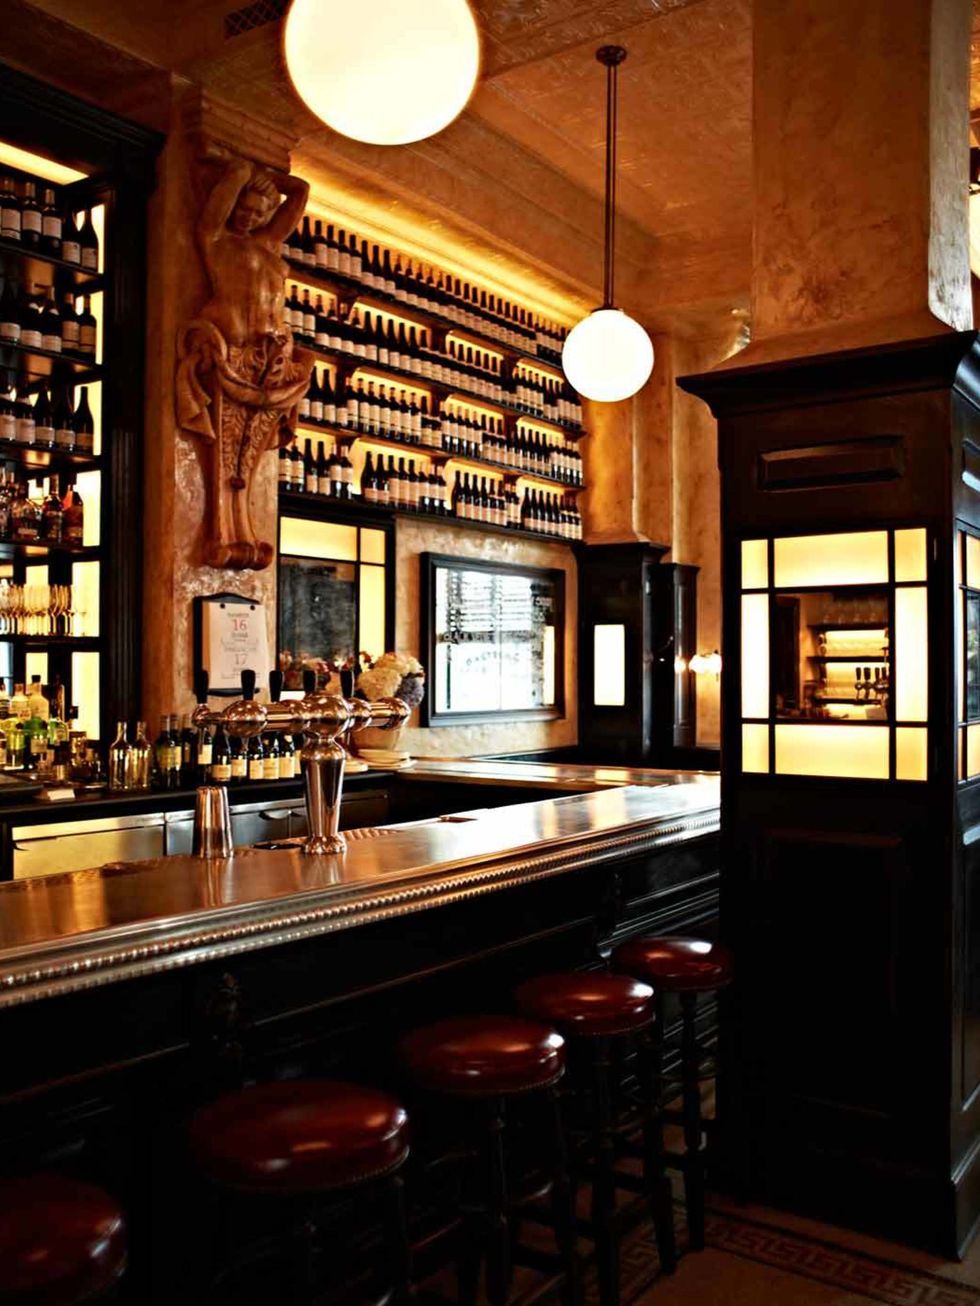 <p>Manhattan cool hits Covent Garden in the form of <a href="http://www.elleuk.com/travel/restaurant-reviews/review-balthazar2">Balthazar</a>. In its first few weeks, you wouldnt have been able to get an elbow in but its calming down a little now (whils